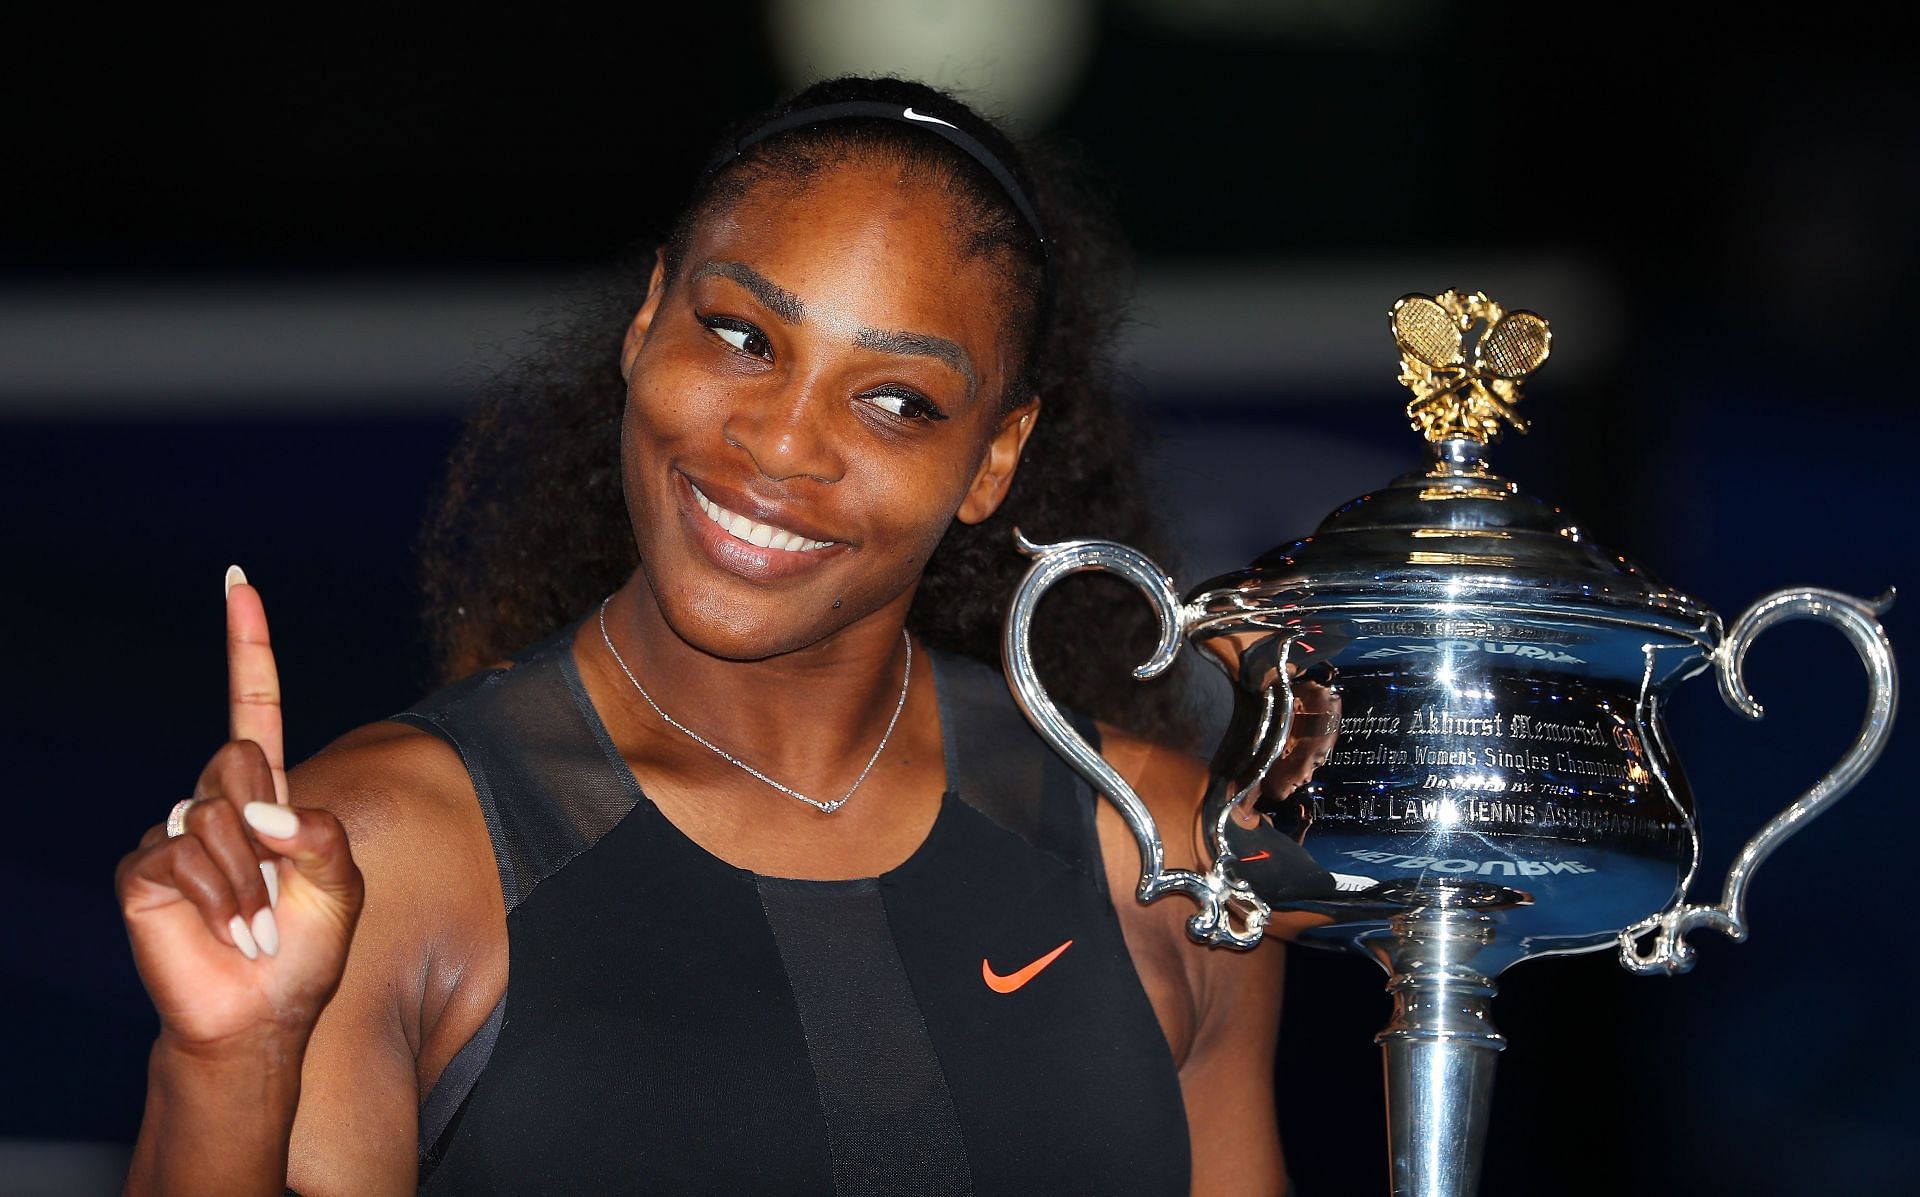 Serena Williams won her 23rd Major at the 2017 Australian Open